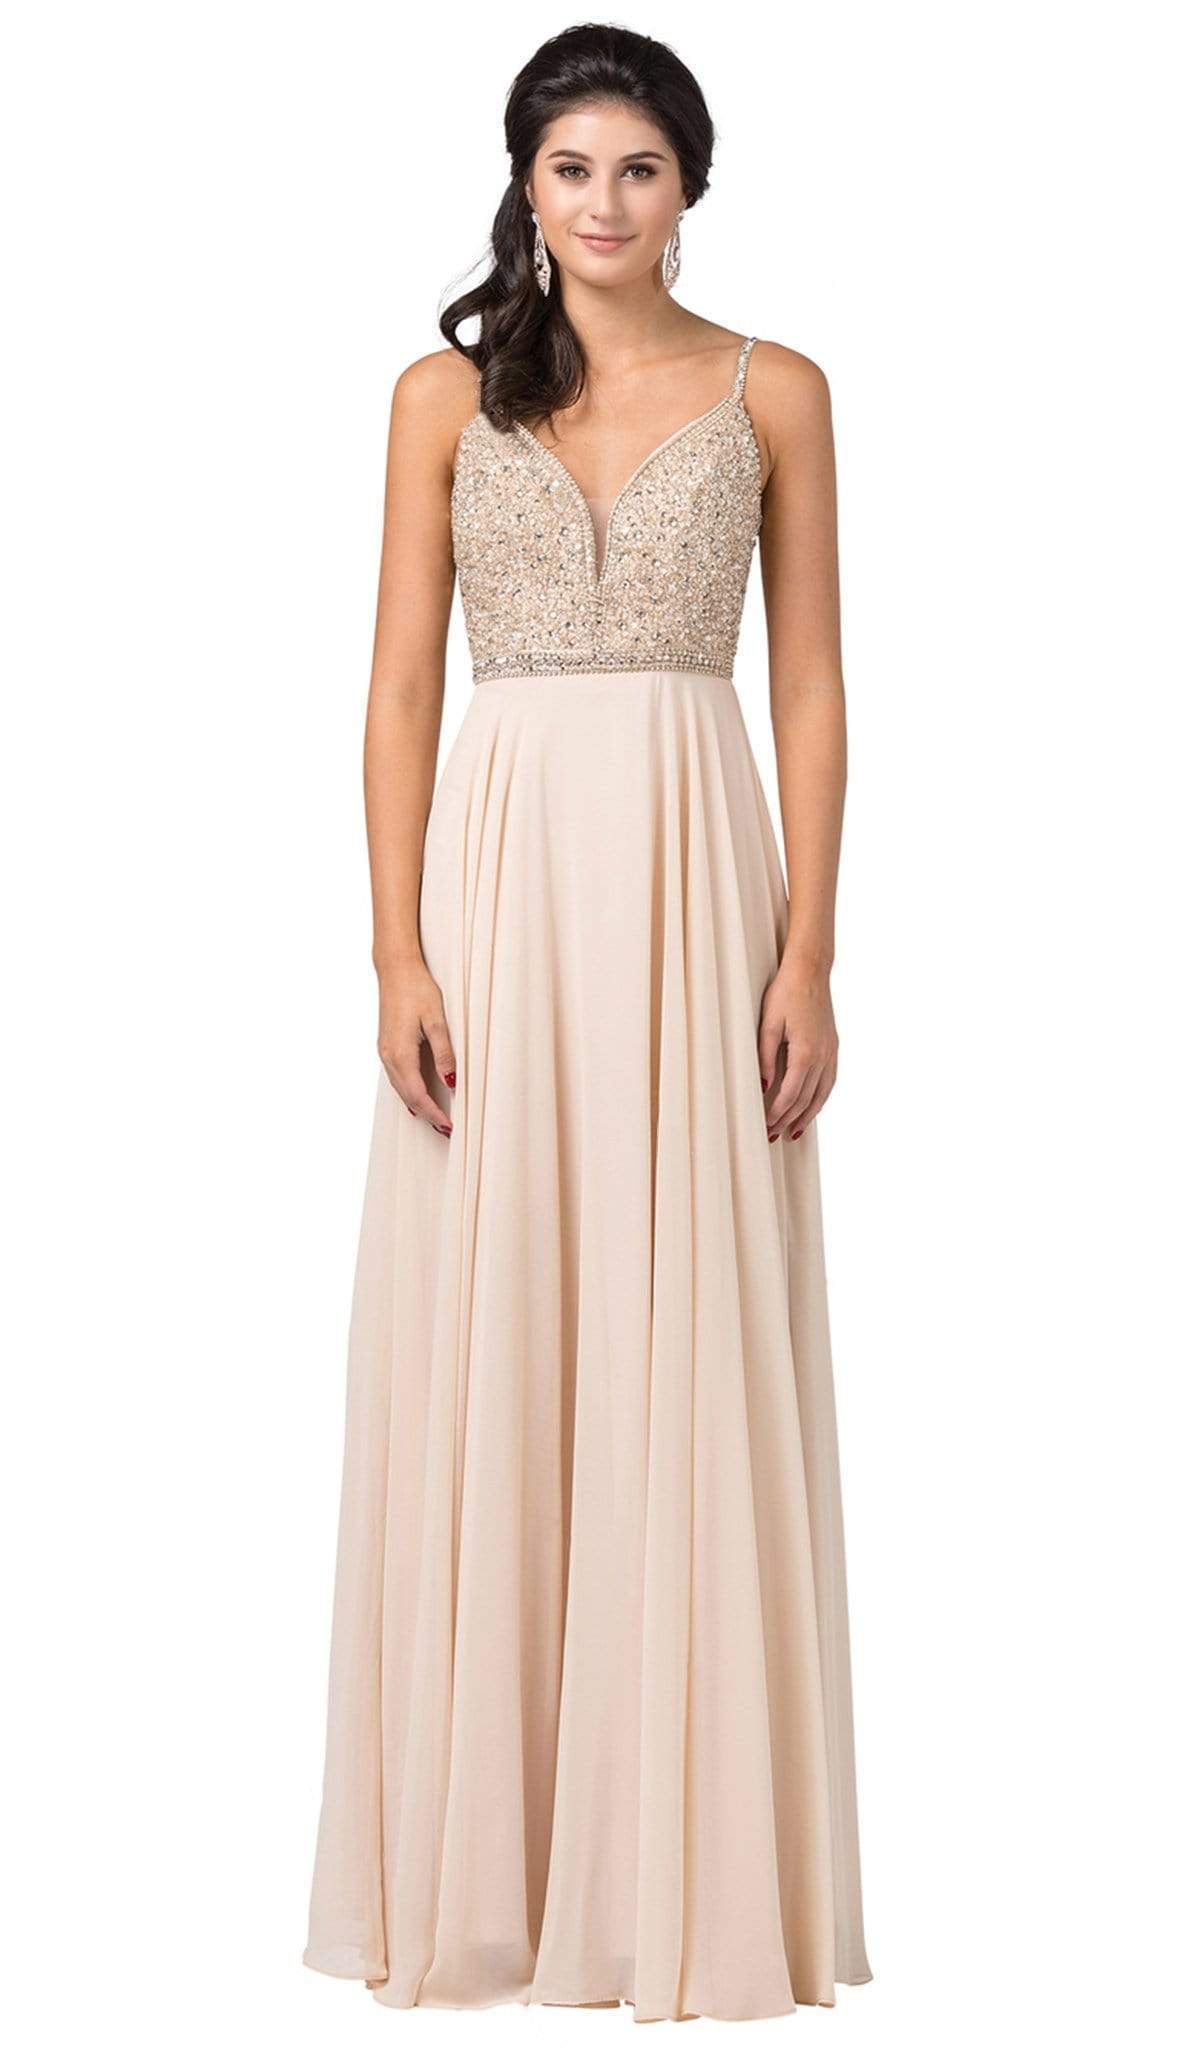 Image of Dancing Queen - 2493 Jewel Beaded A-Line Chiffon Gown